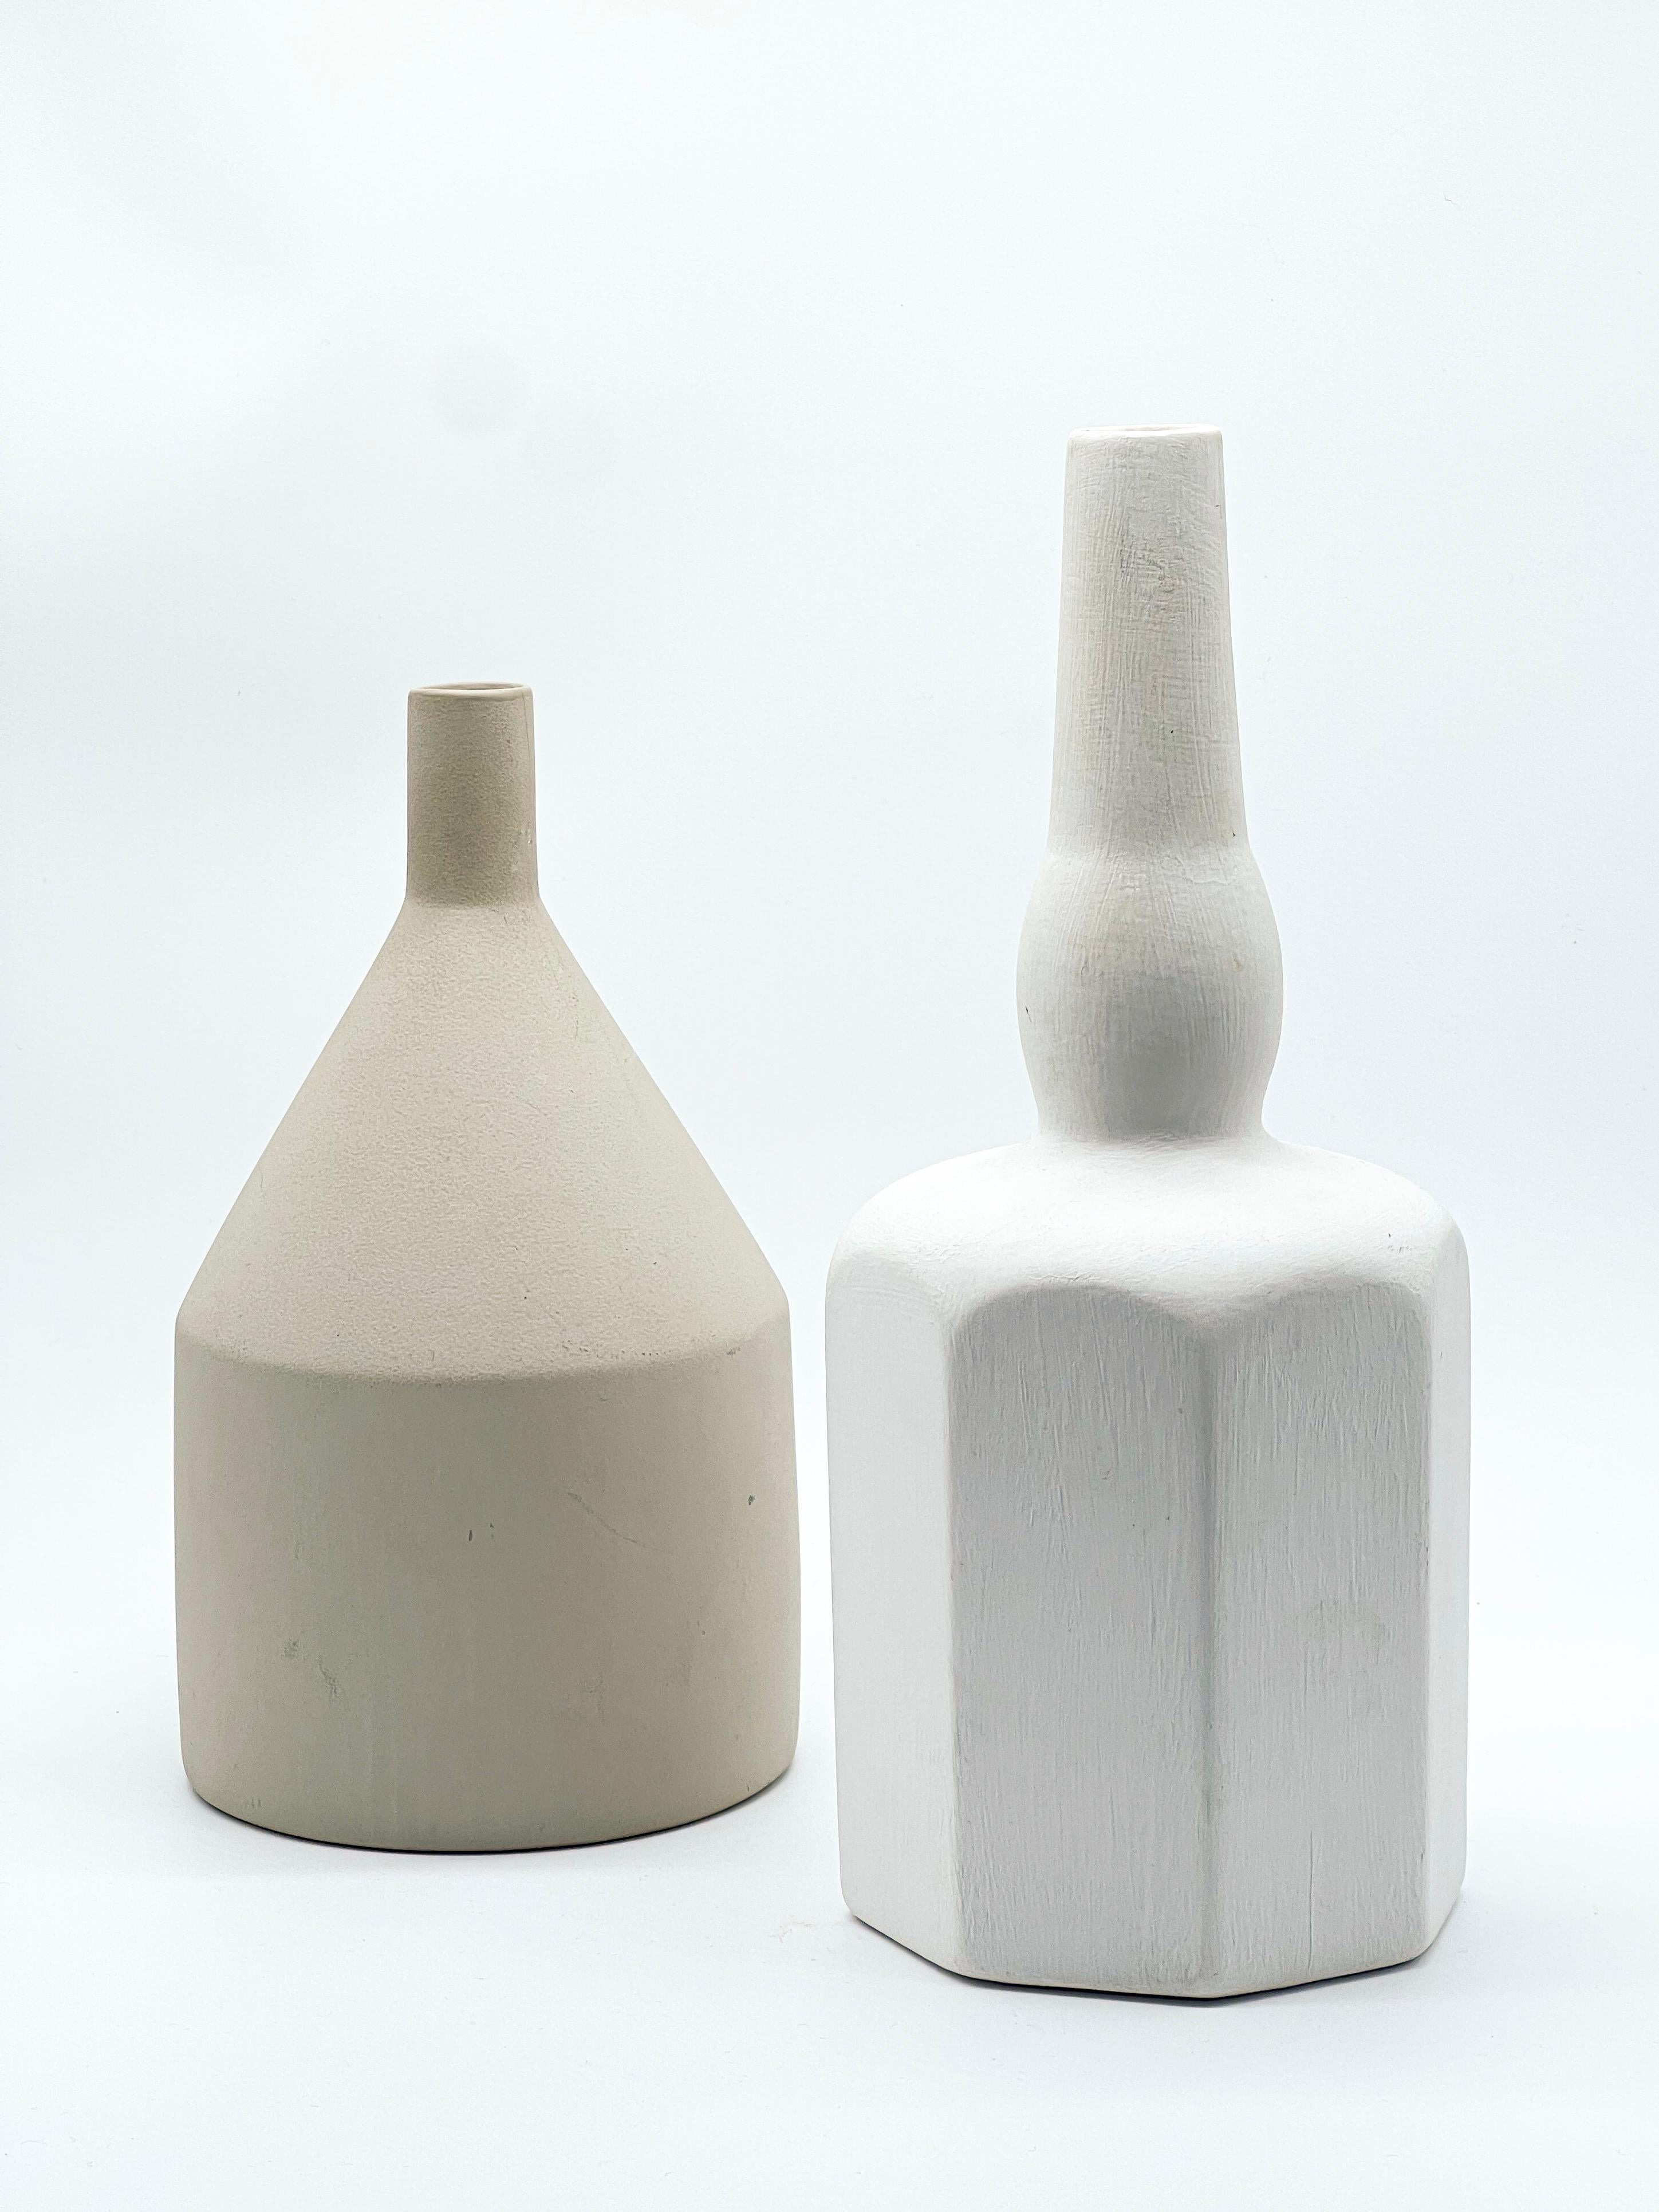 Established in 1998, the project Le Morandine is a tribute to a grand master of Italian art, Giorgio Morandi, an artist who, with particular intensity and elegance, was able to shed new light on the humble objects of everyday life: vases, boxes,